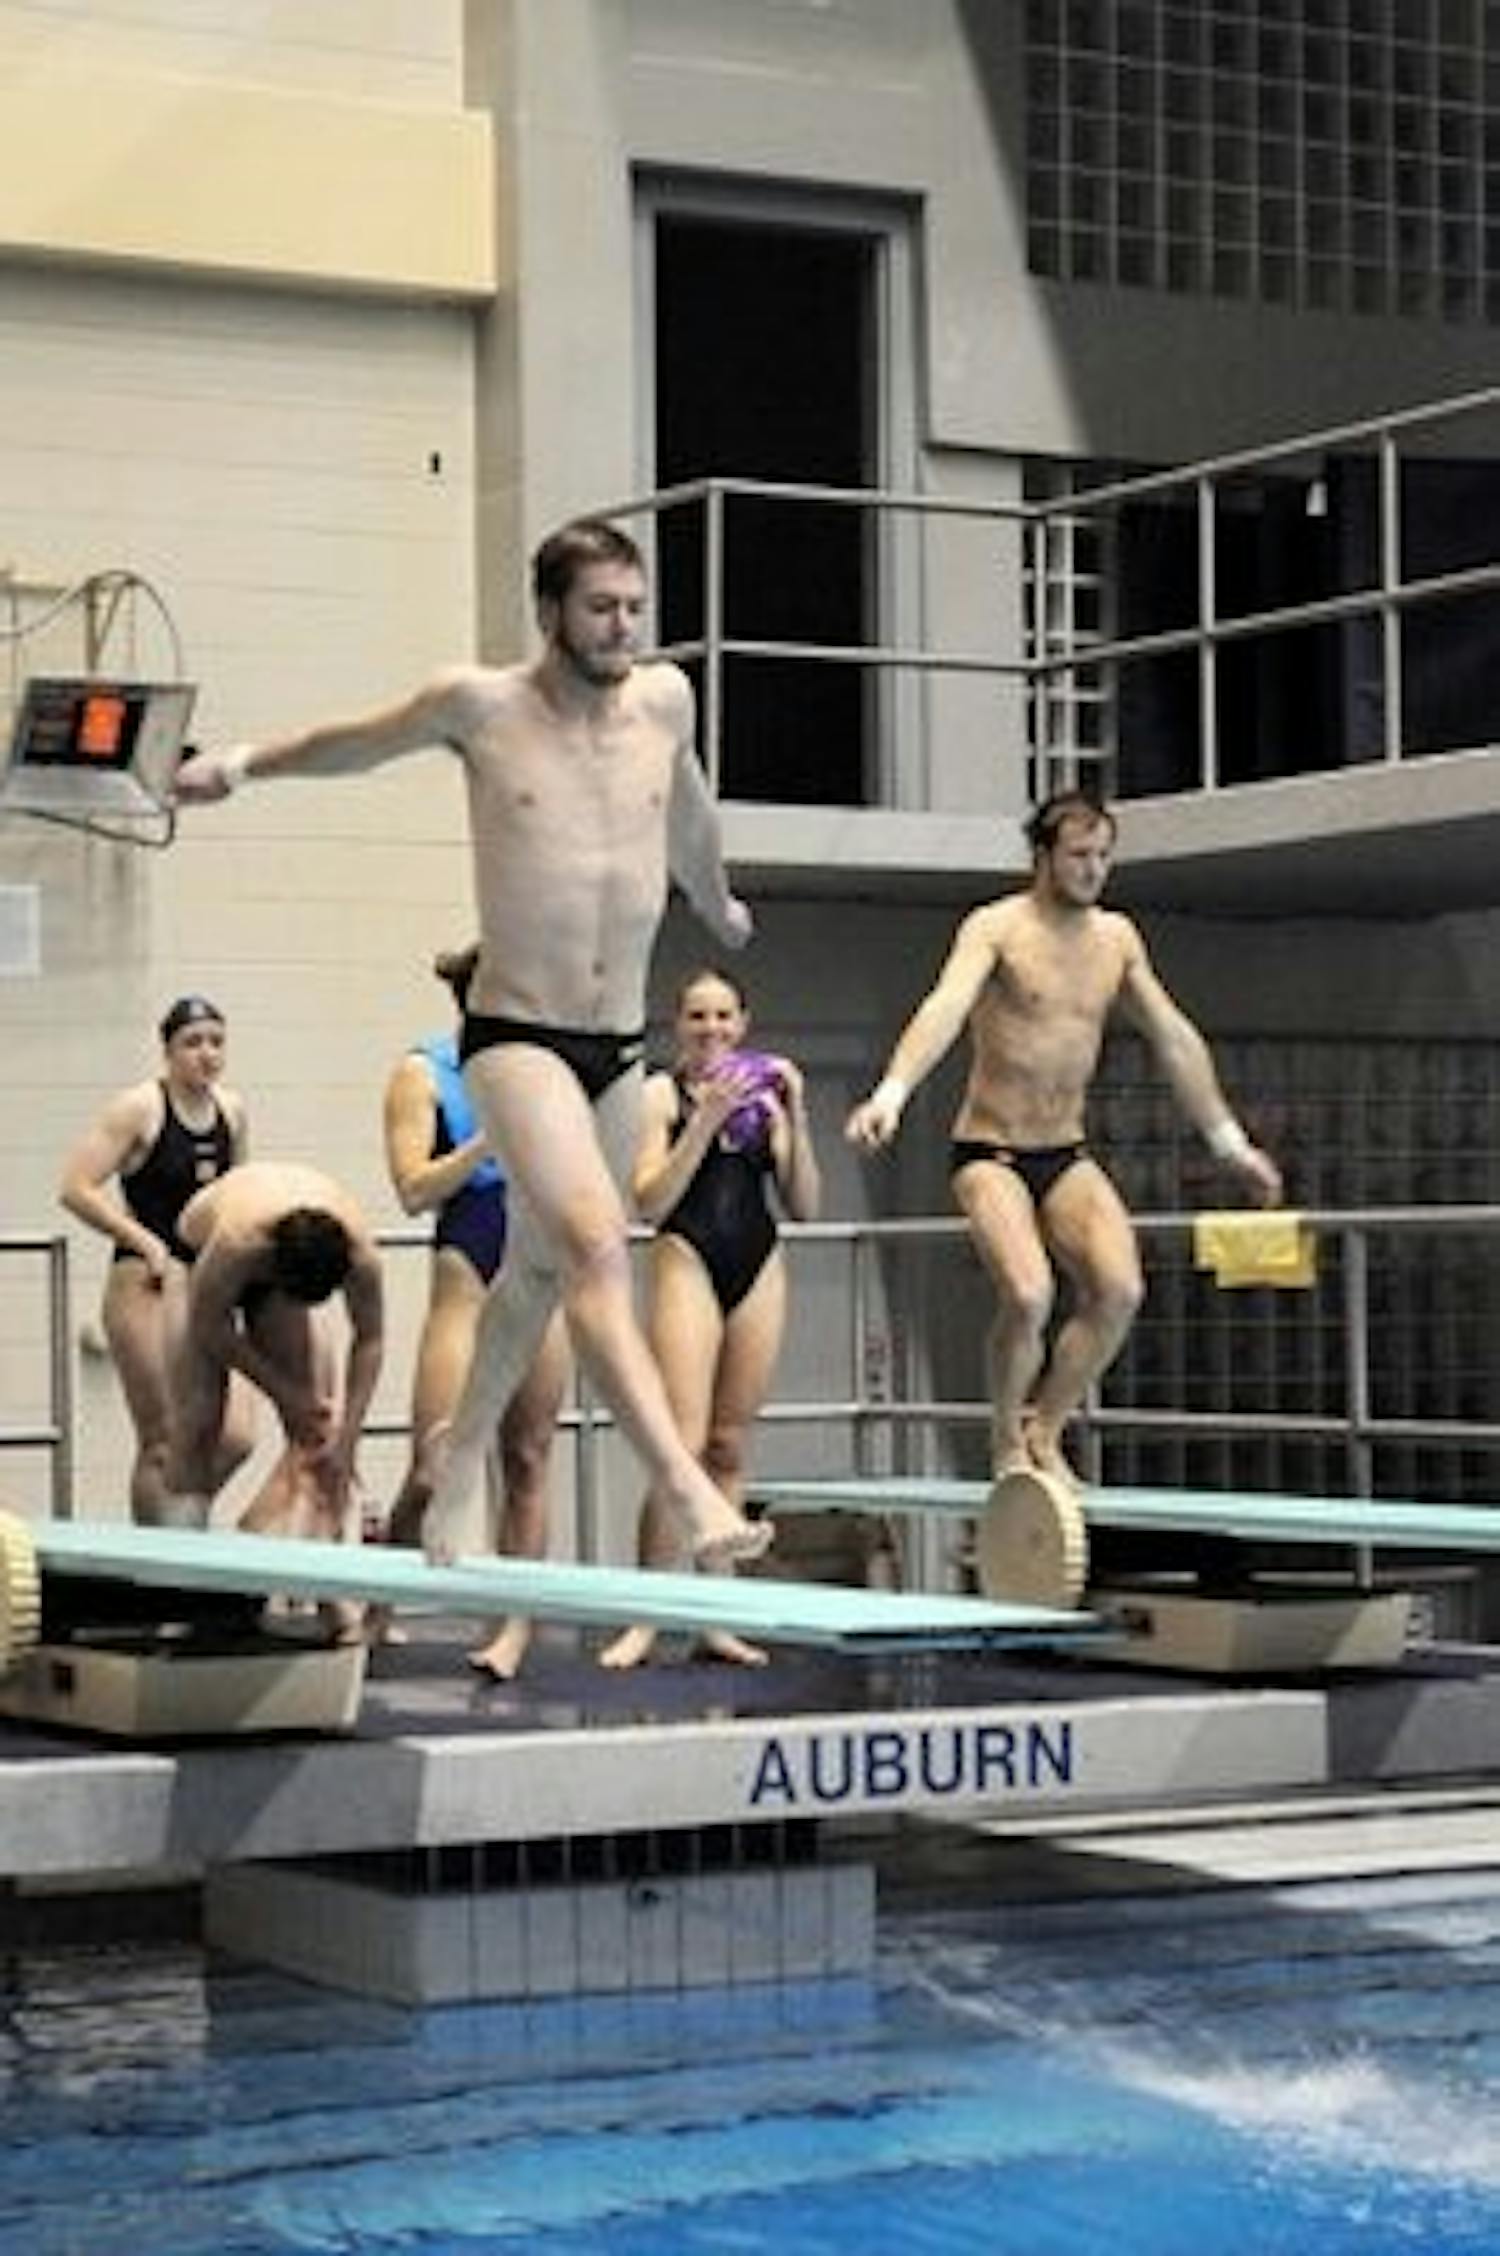 John Santeiu IV scored a 397.45 on his sixth dive attempt at the Georgia Diving Invitational Jan. 5. He was later named SEC Diver of the Week for his seventh meet victory of the season. (Christen Harned / ASSISTANT PHOTO EDITOR)